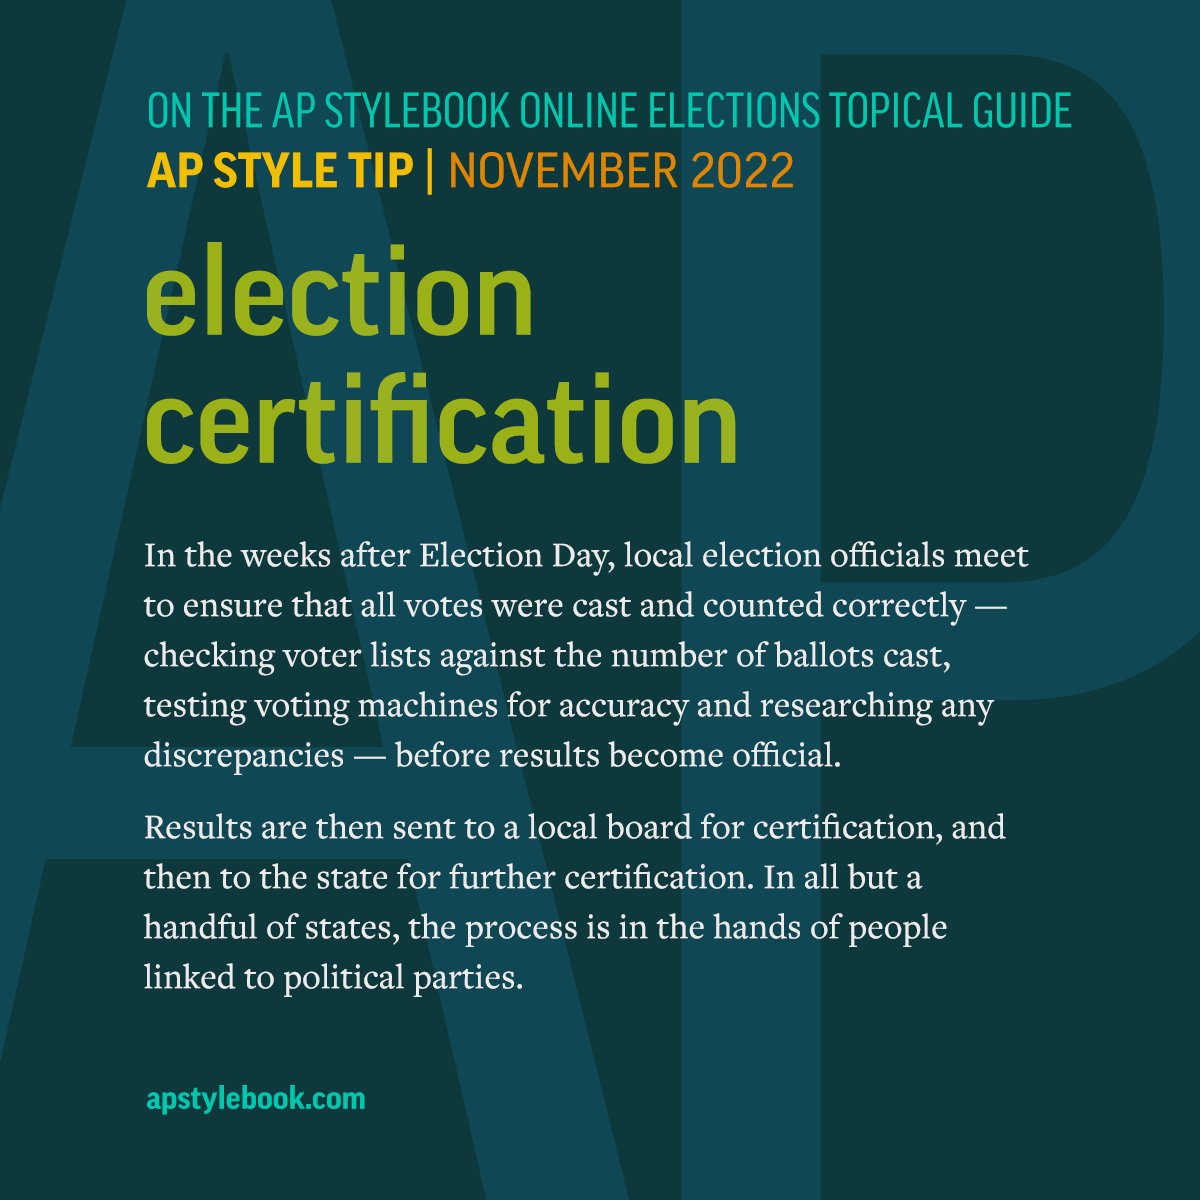 For generations, the election certification process drew little public attention, but in recent years some boards have balked at certifying the results, citing unsubstantiated claims of fraud or other wrongdoing. Our AP Stylebook Online Topical Guide: apne.ws/6BXMlm5